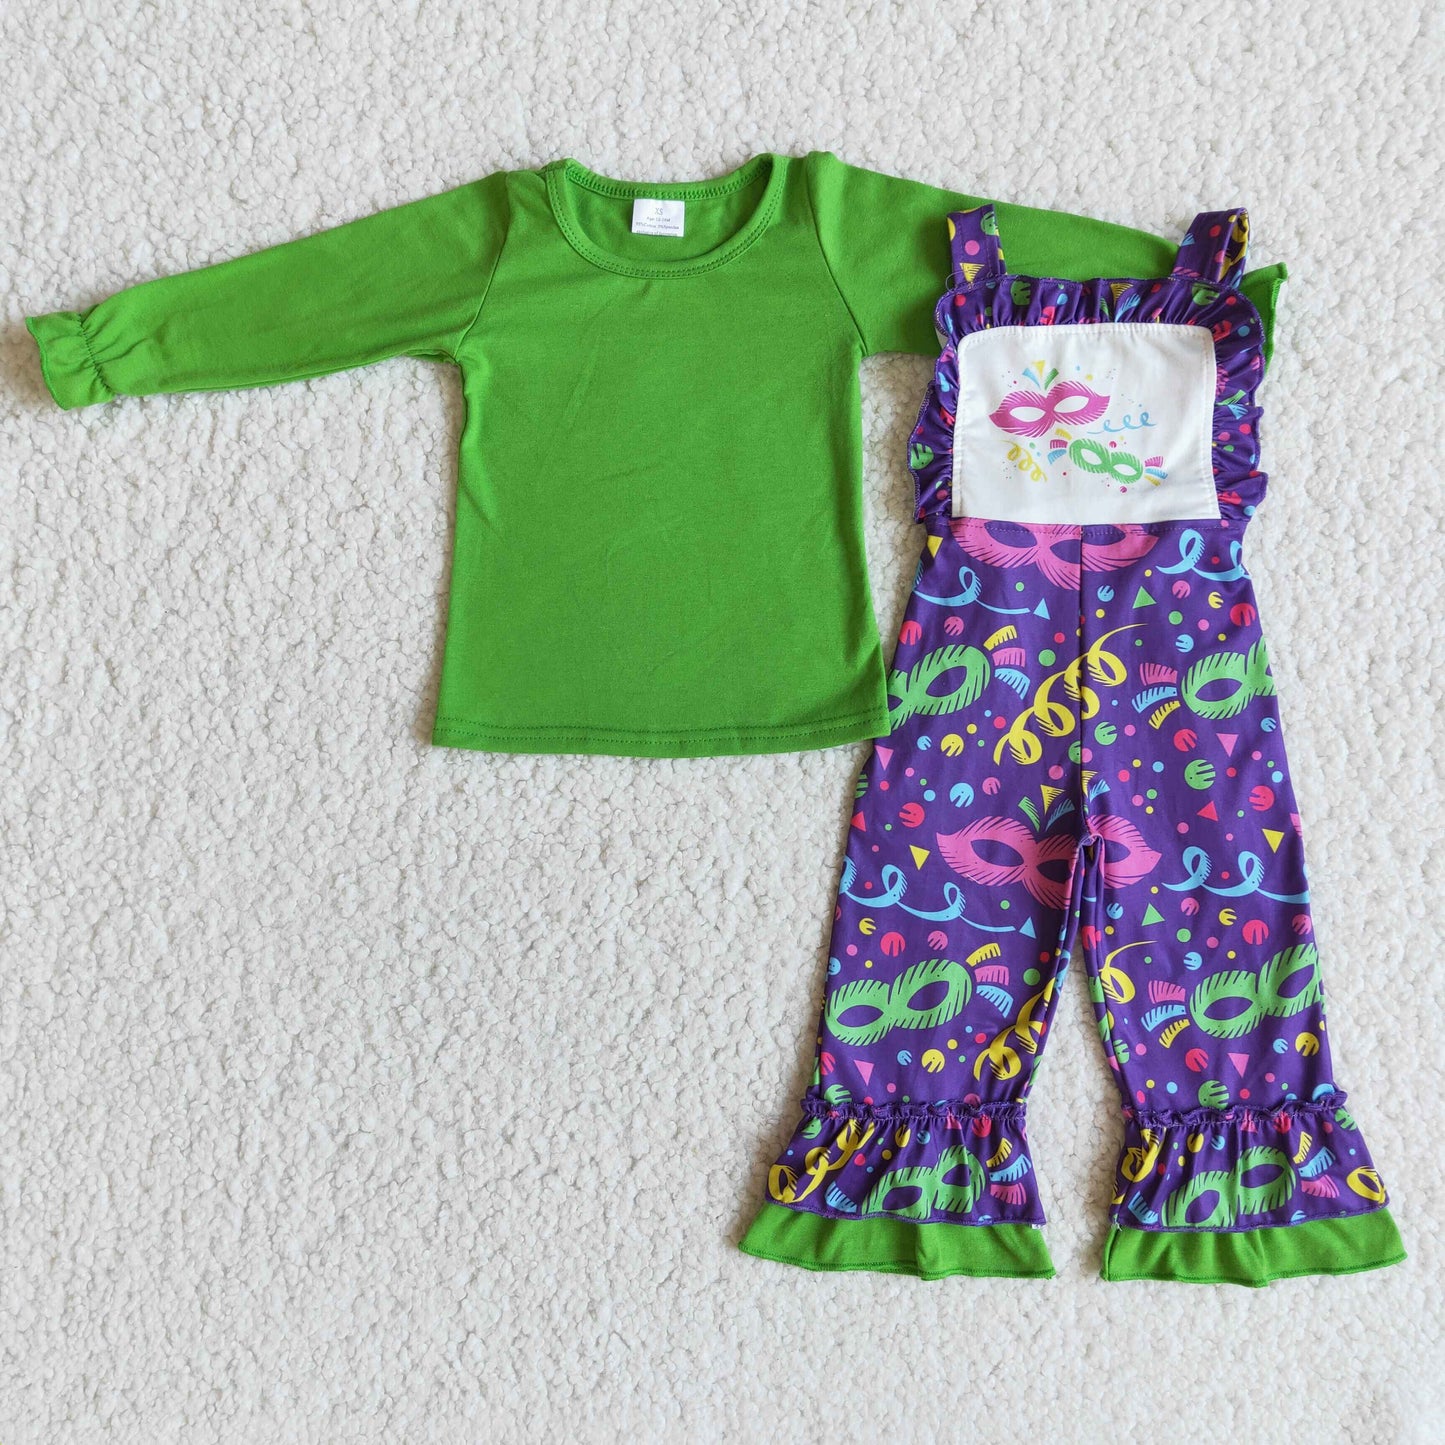 green cotton top mardi overall outfit